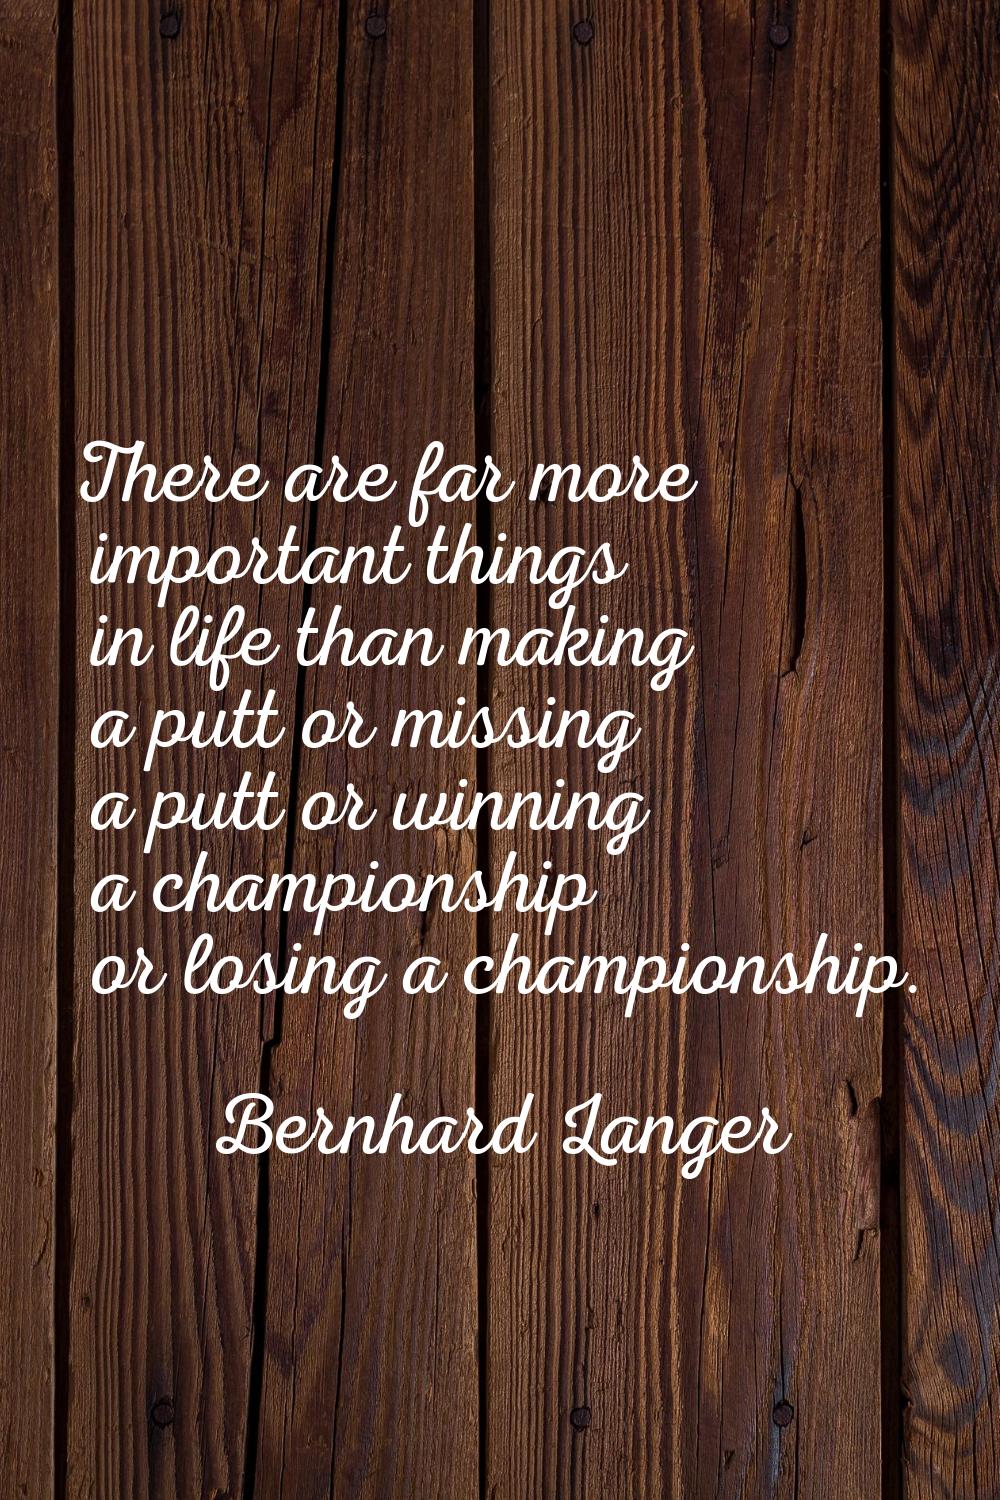 There are far more important things in life than making a putt or missing a putt or winning a champ